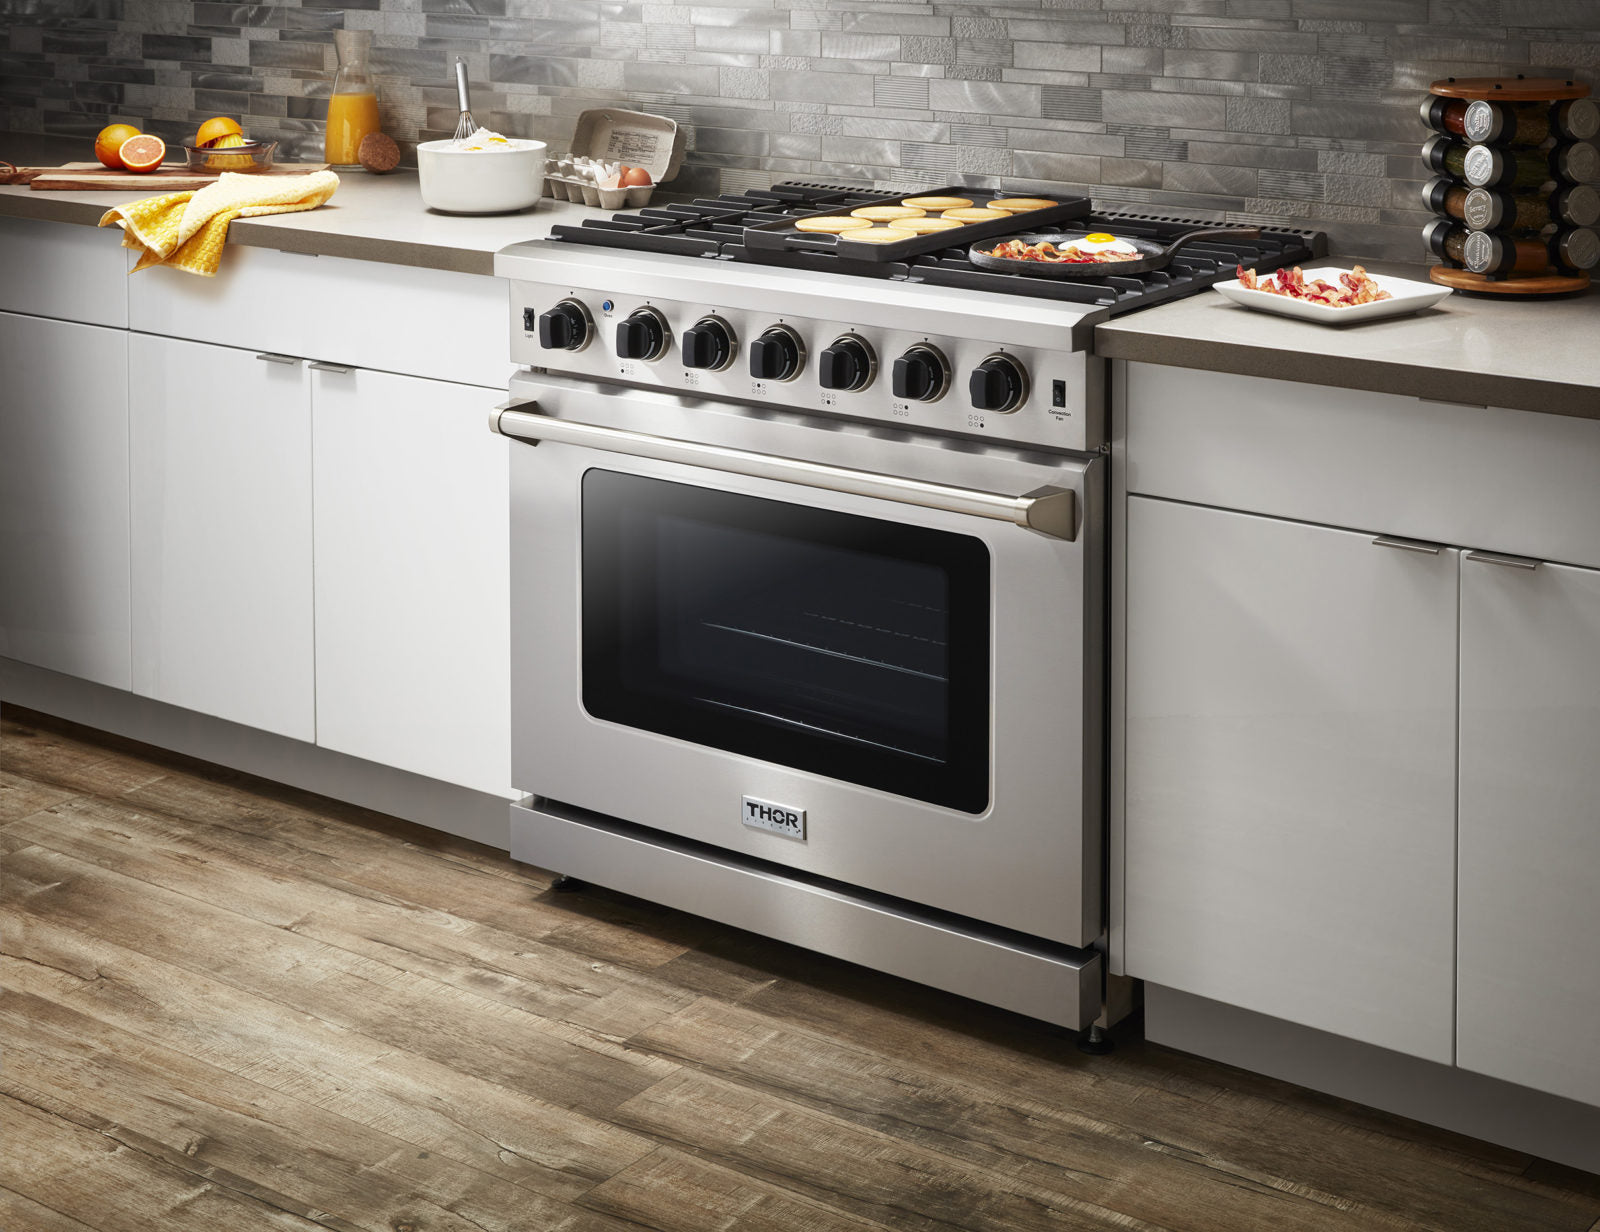 Range vs. Cooktop: Which Should You Choose?